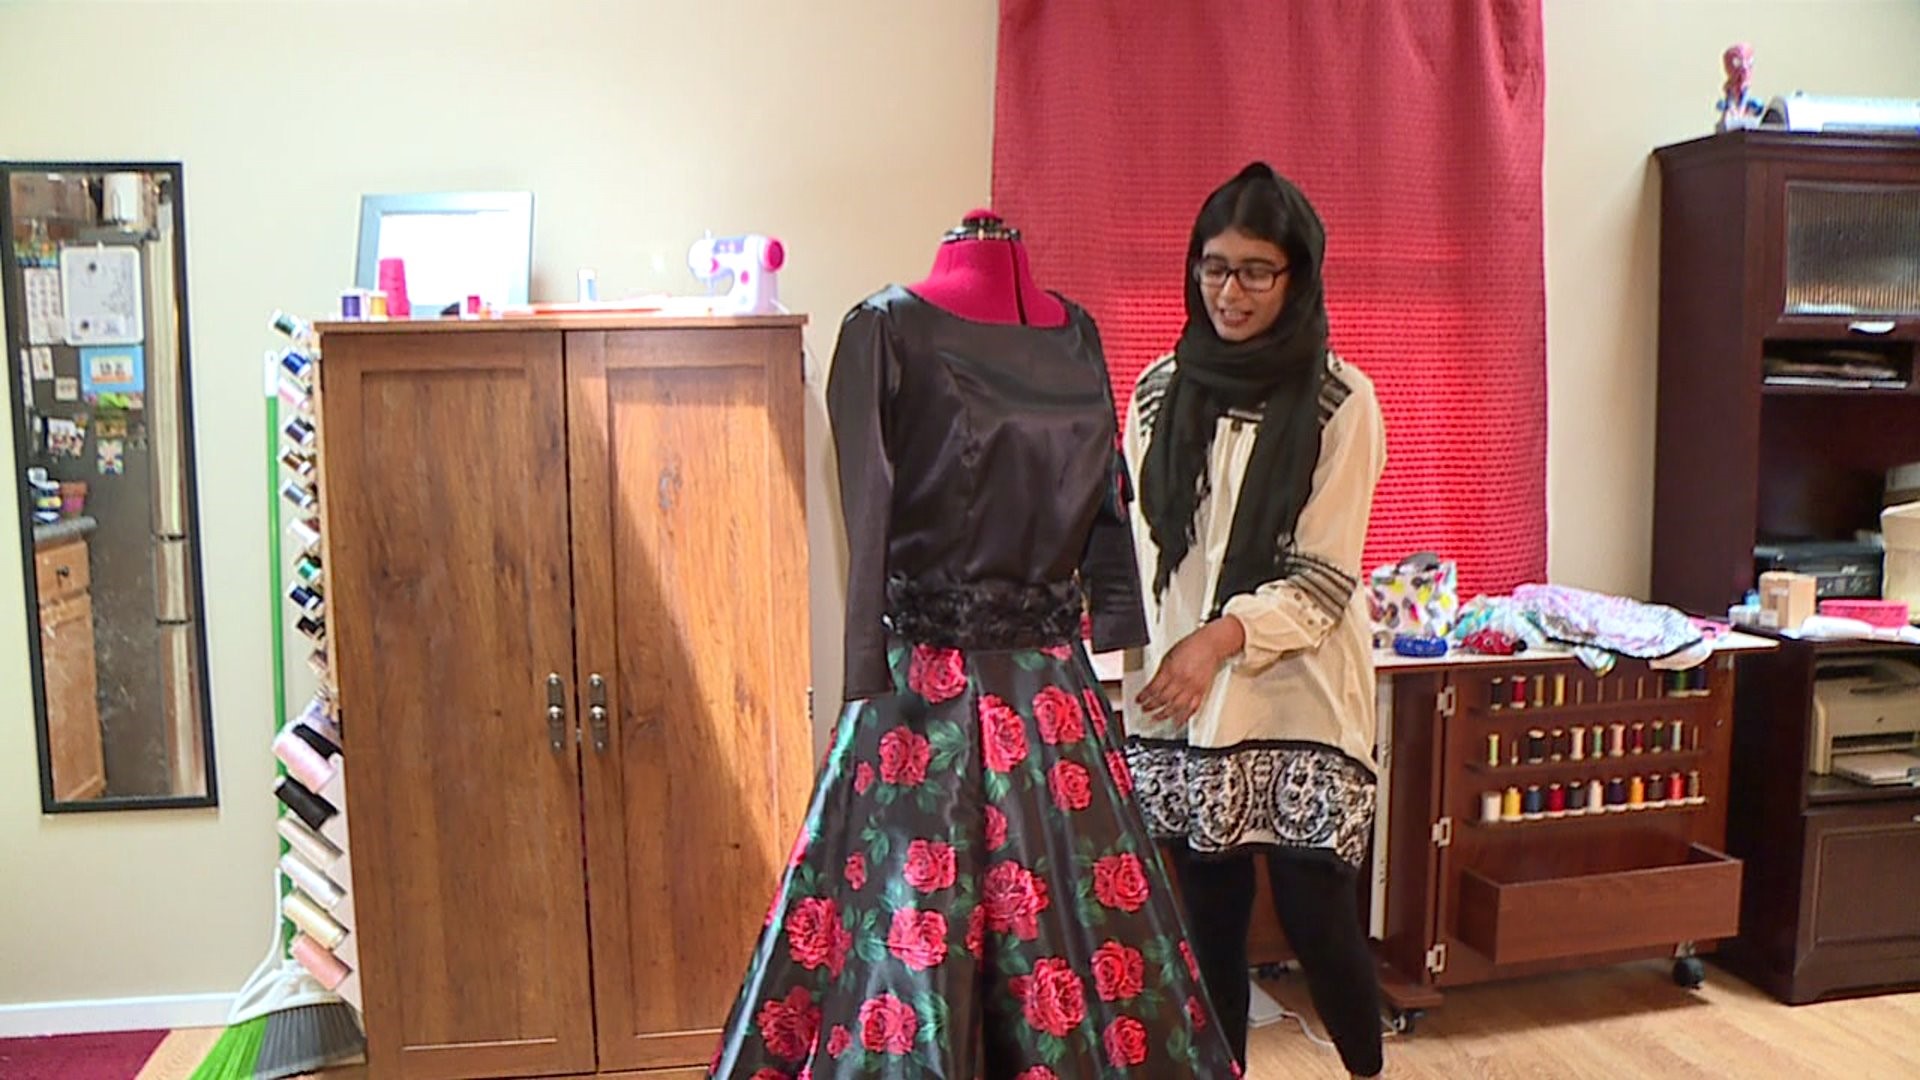 Student from Pakistan learns to sew while living in Davenport